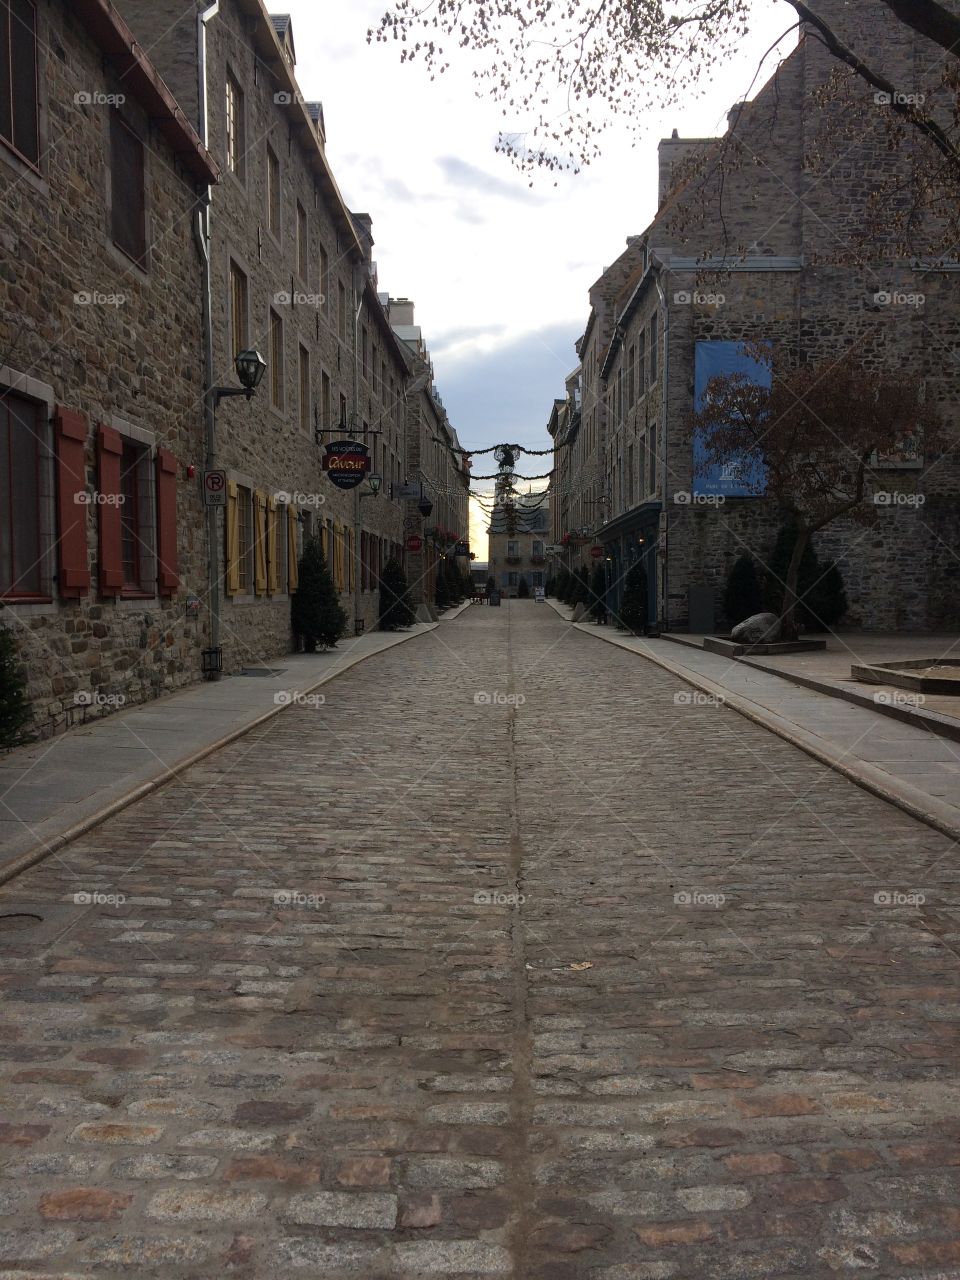 Cobblestone road in Old Town Quebec 